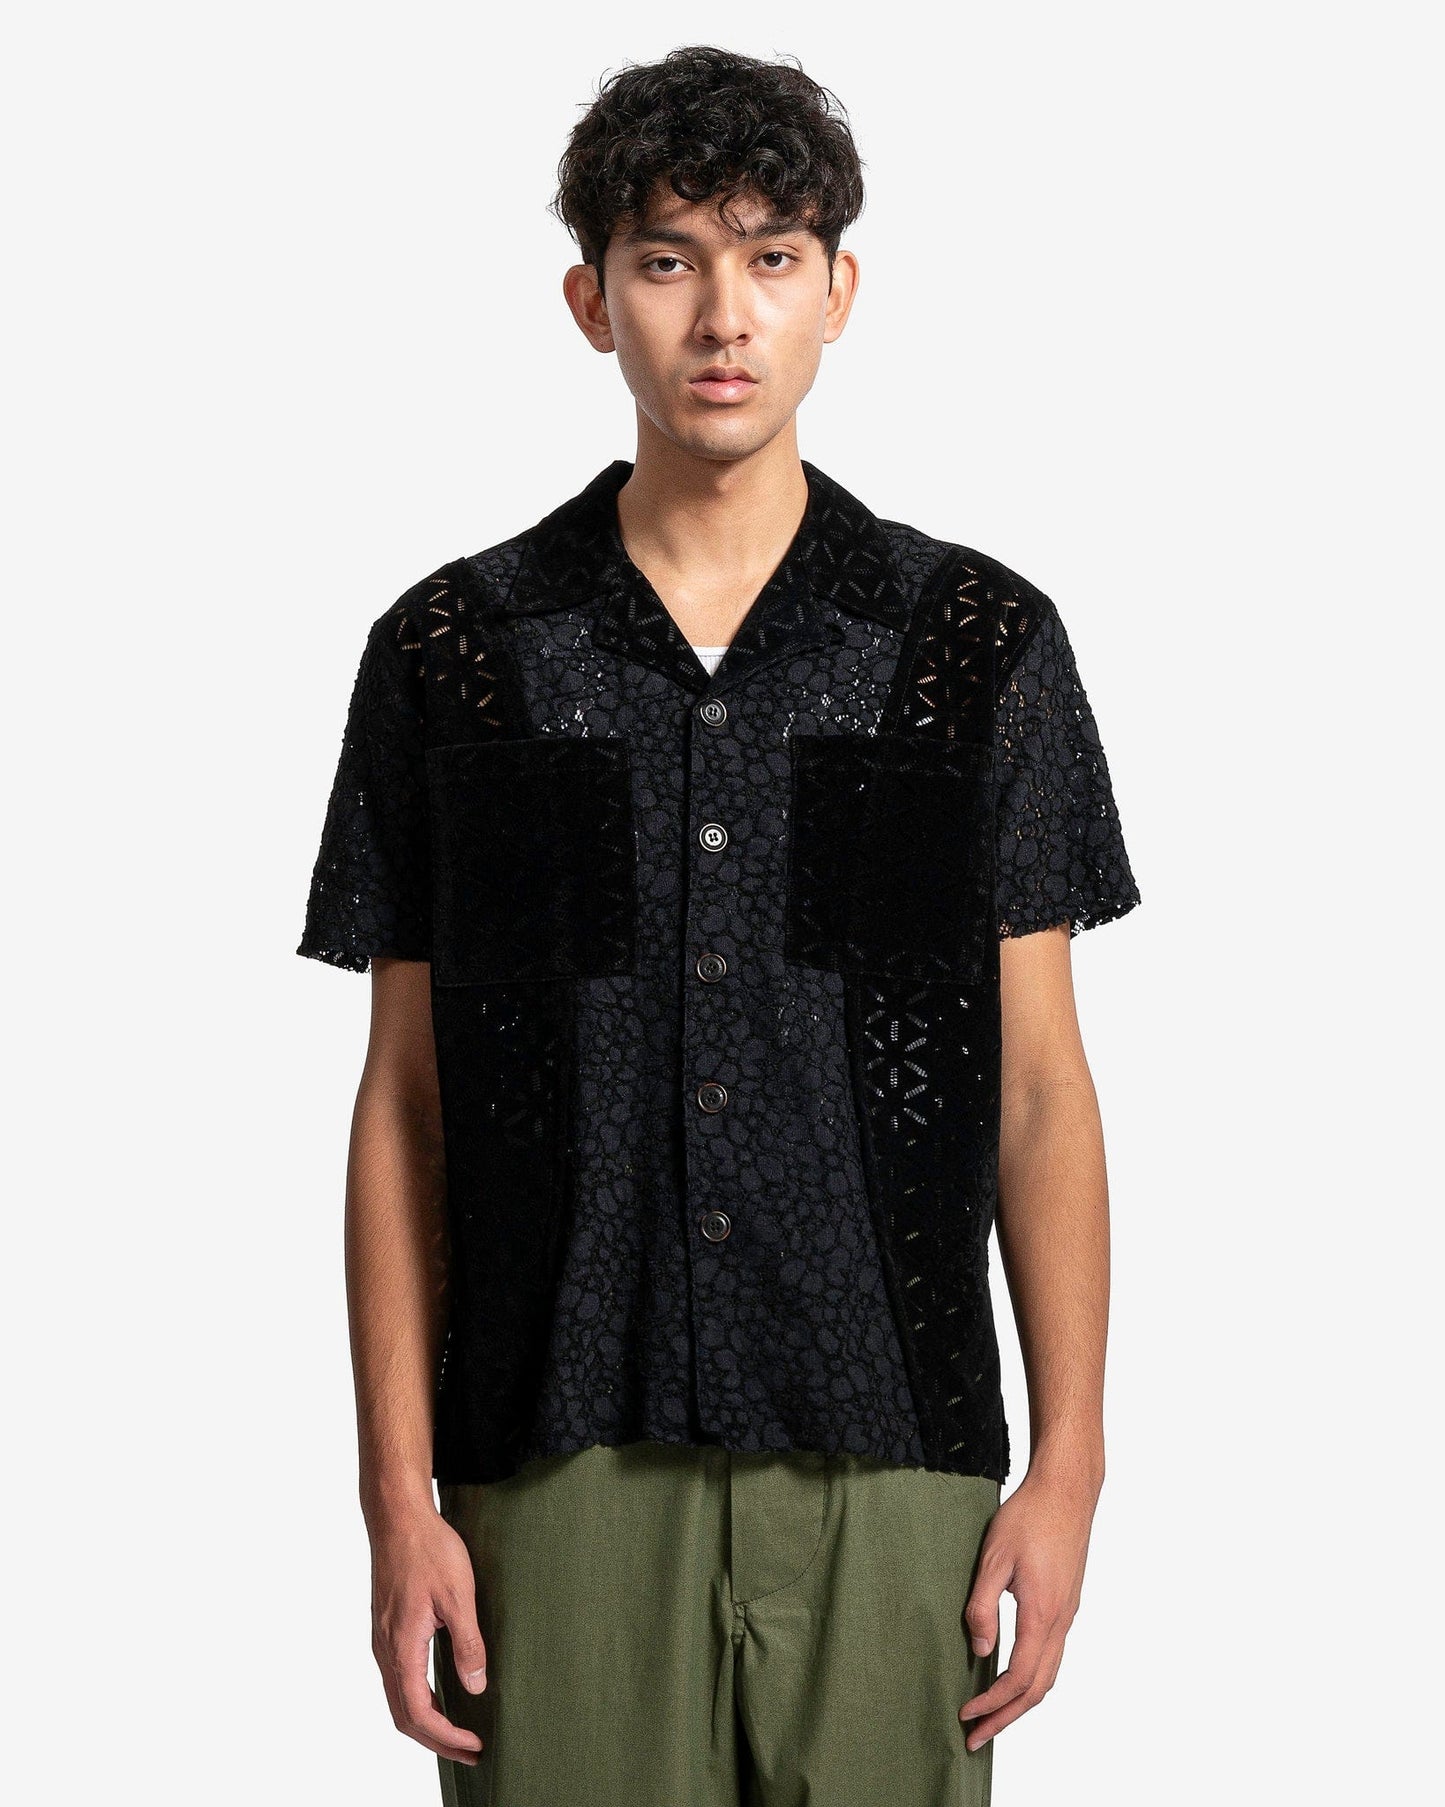 Andersson Bell Men's Shirts Half Sheer Flower Lace Shirt in Black